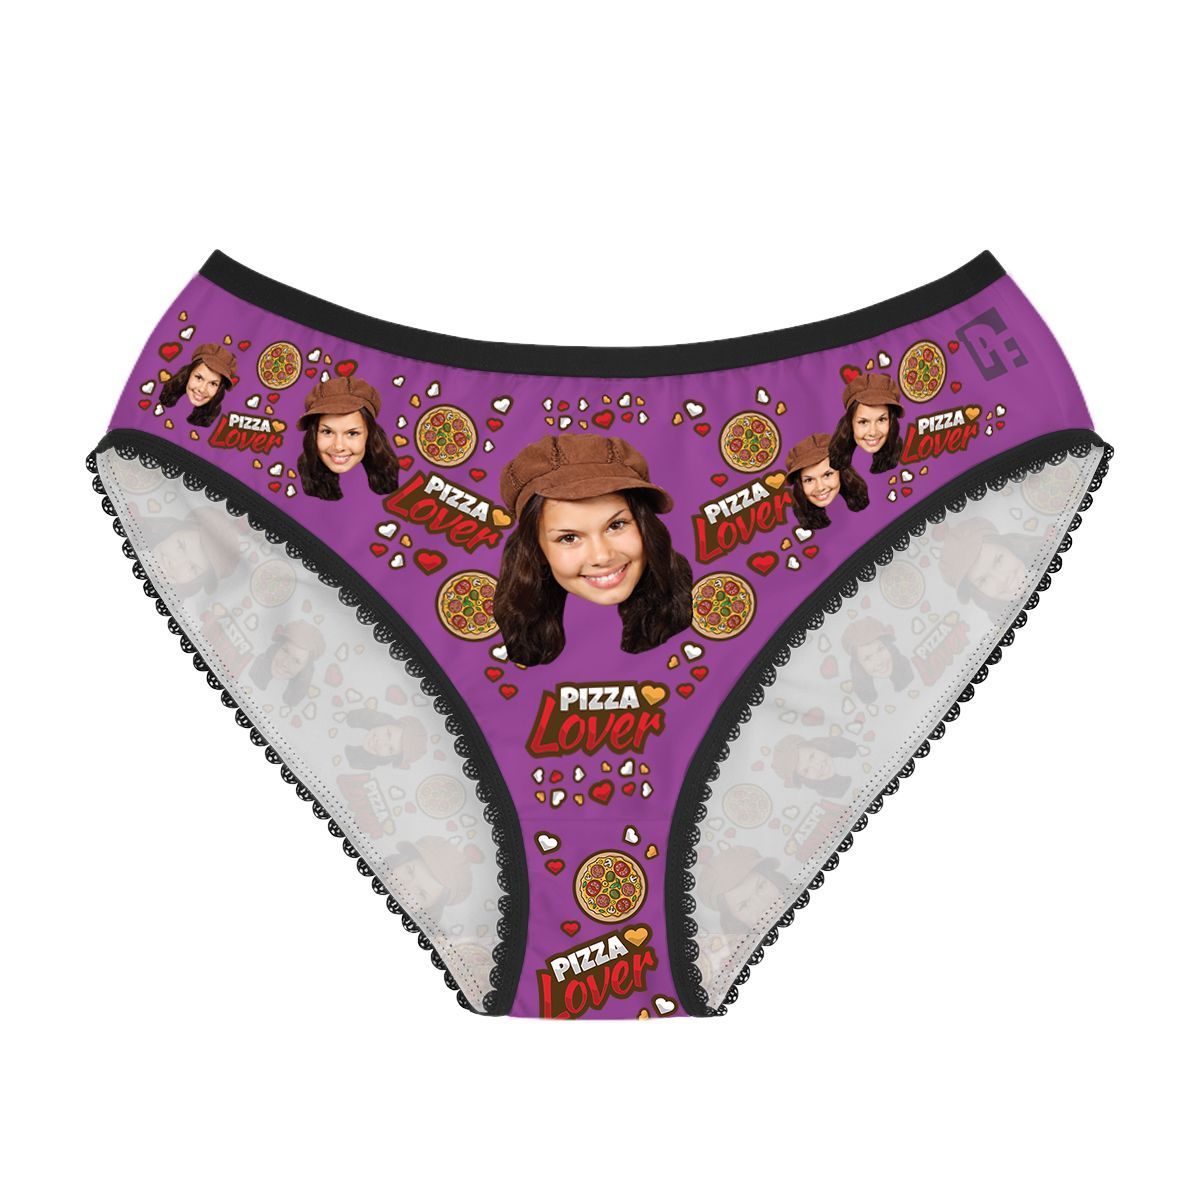 Purple Pizza Lover women's underwear briefs personalized with photo printed on them